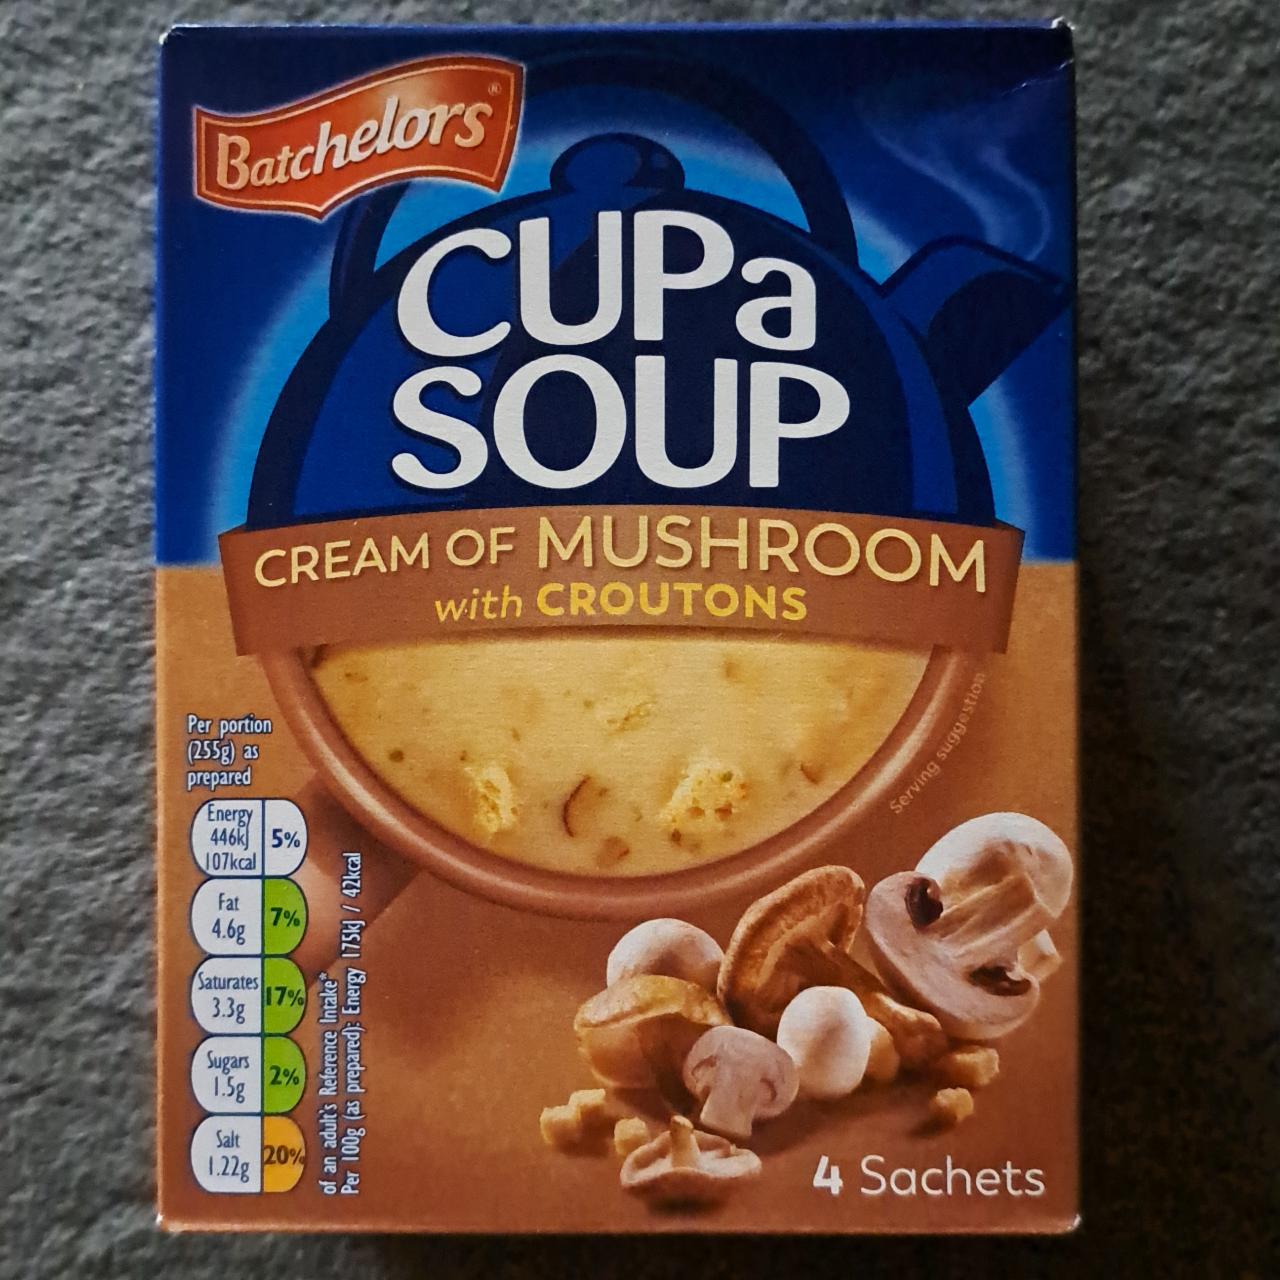 Fotografie - Bachelors Cup a soup Cream of mushroom with croutons 